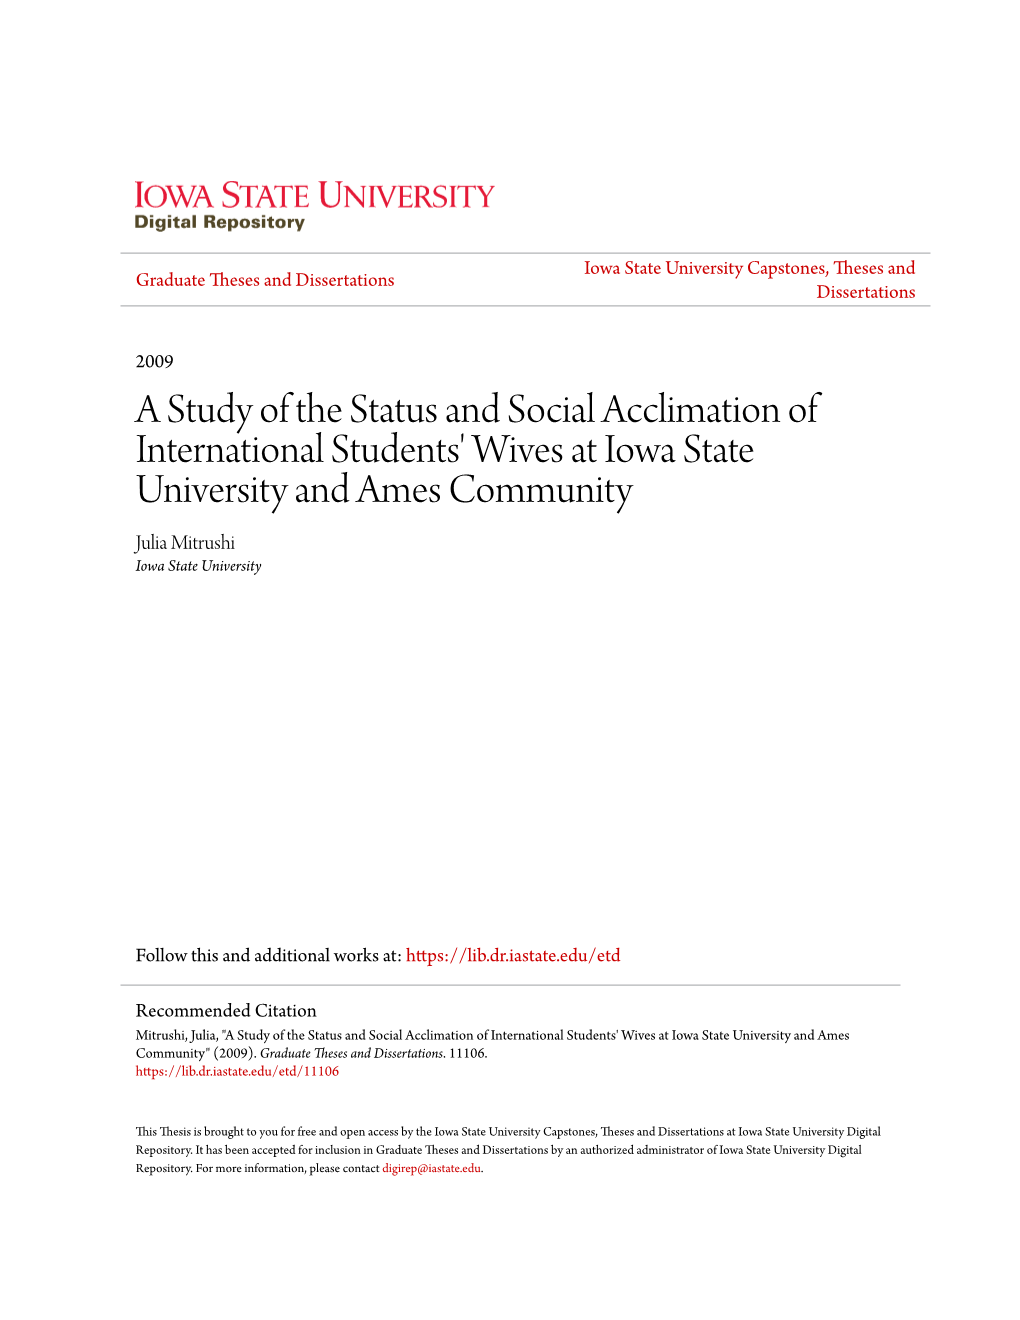 A Study of the Status and Social Acclimation of International Students' Wives at Iowa State University and Ames Community Julia Mitrushi Iowa State University